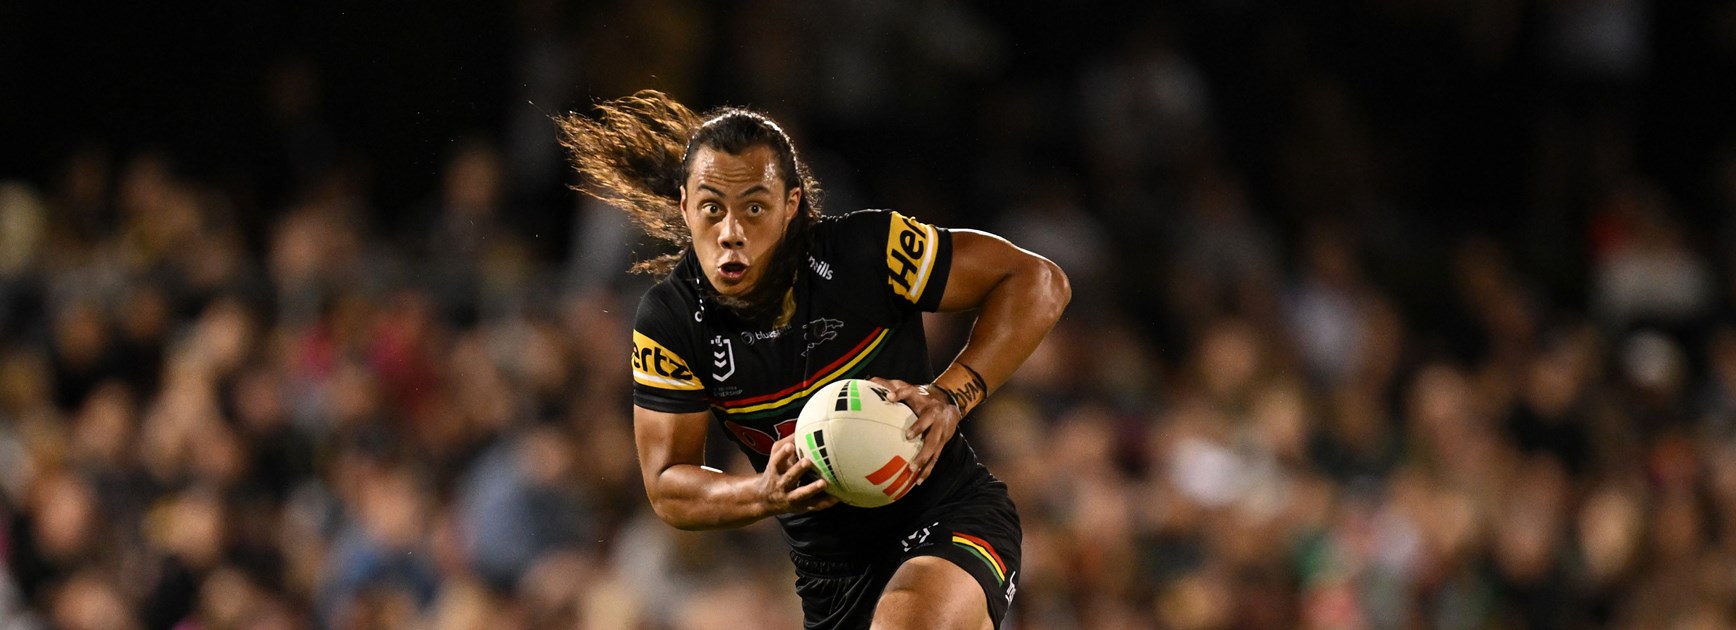 Panthers props discuss the return of Luai, Tago